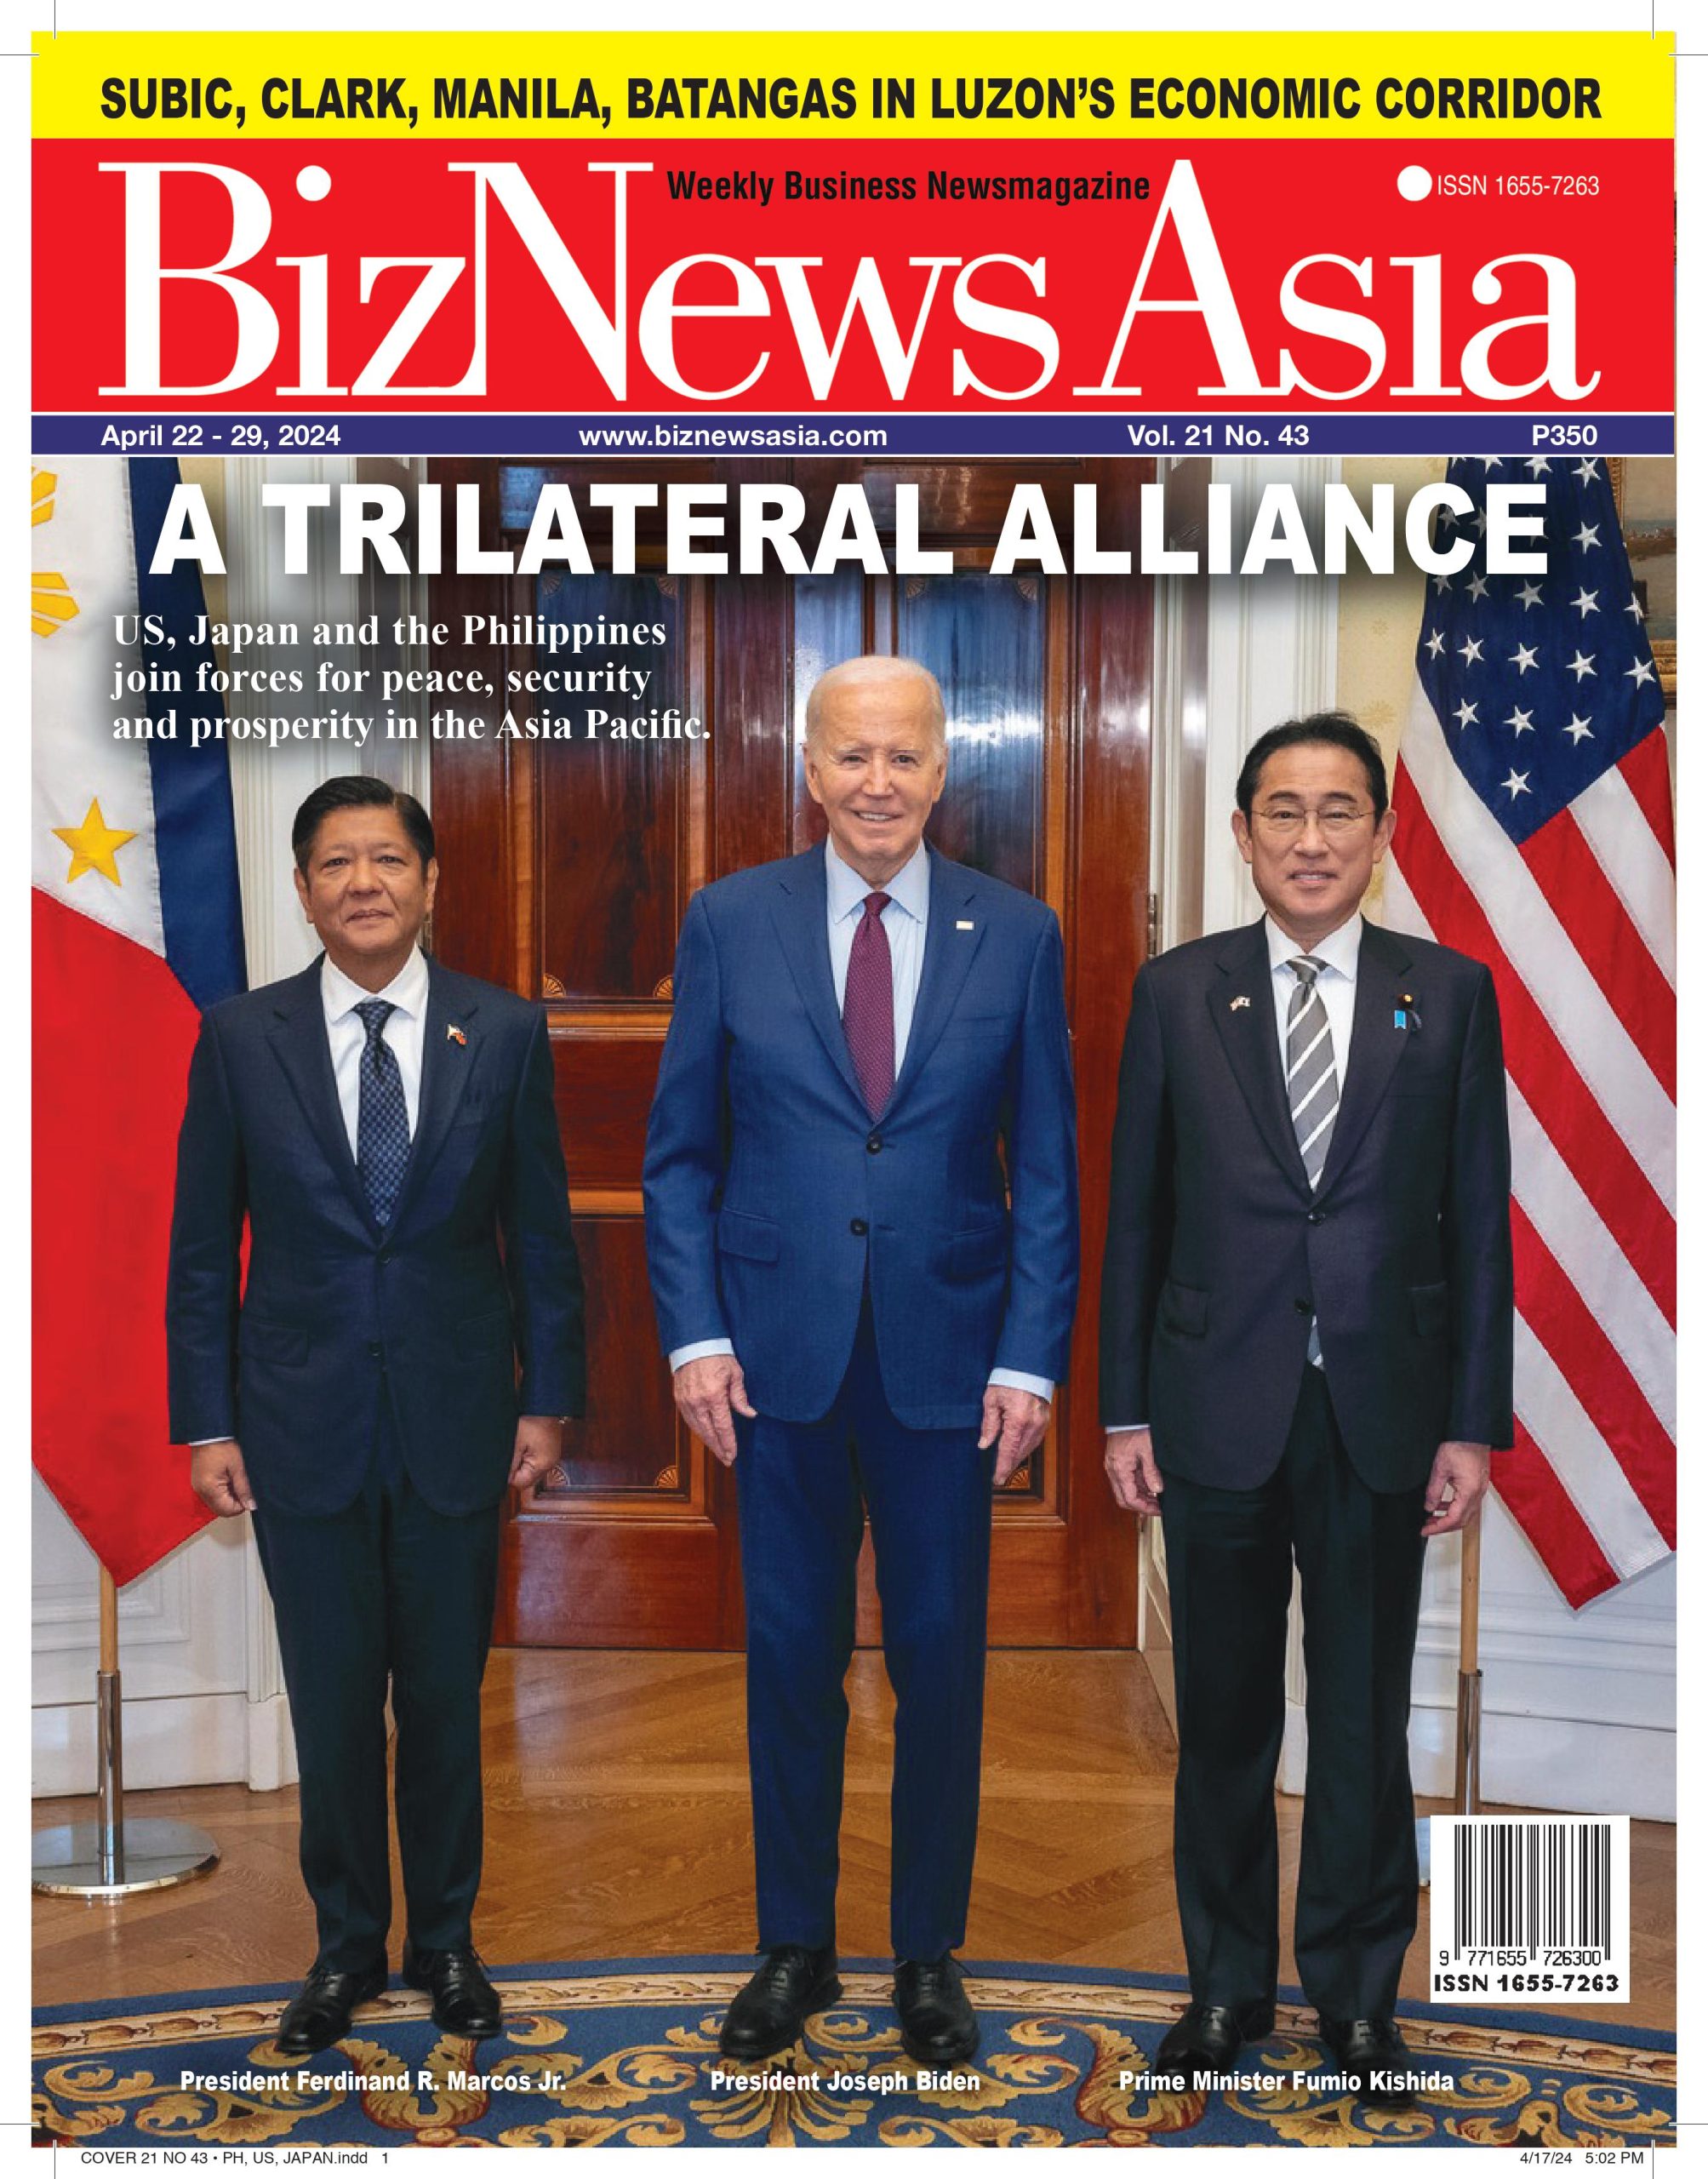 A TRILATERAL ALLIANCE